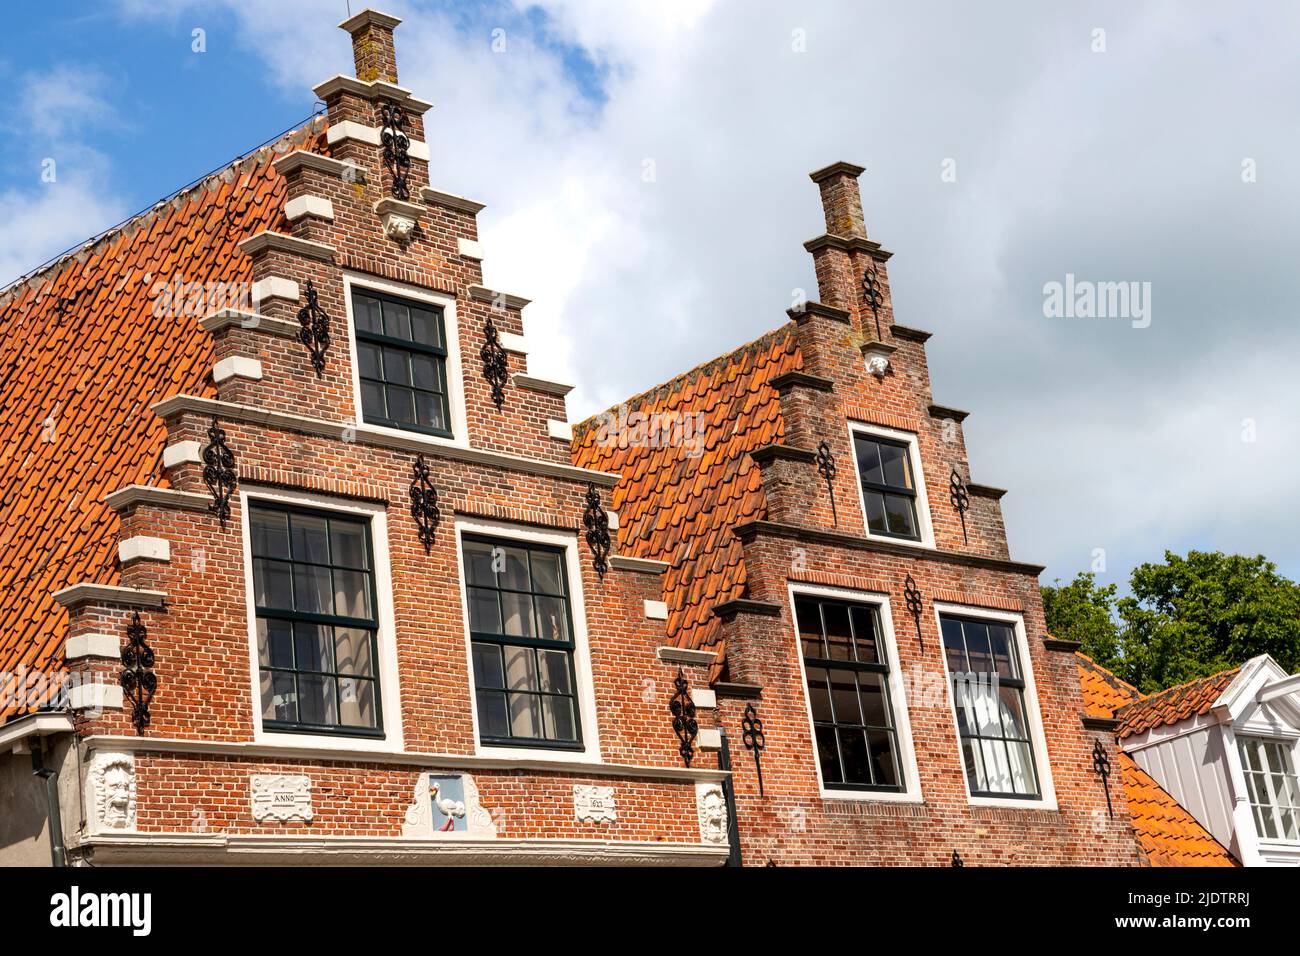 Historic step gabled architecture in the market square of Edam, North Holland, The Netherlands. Stock Photo